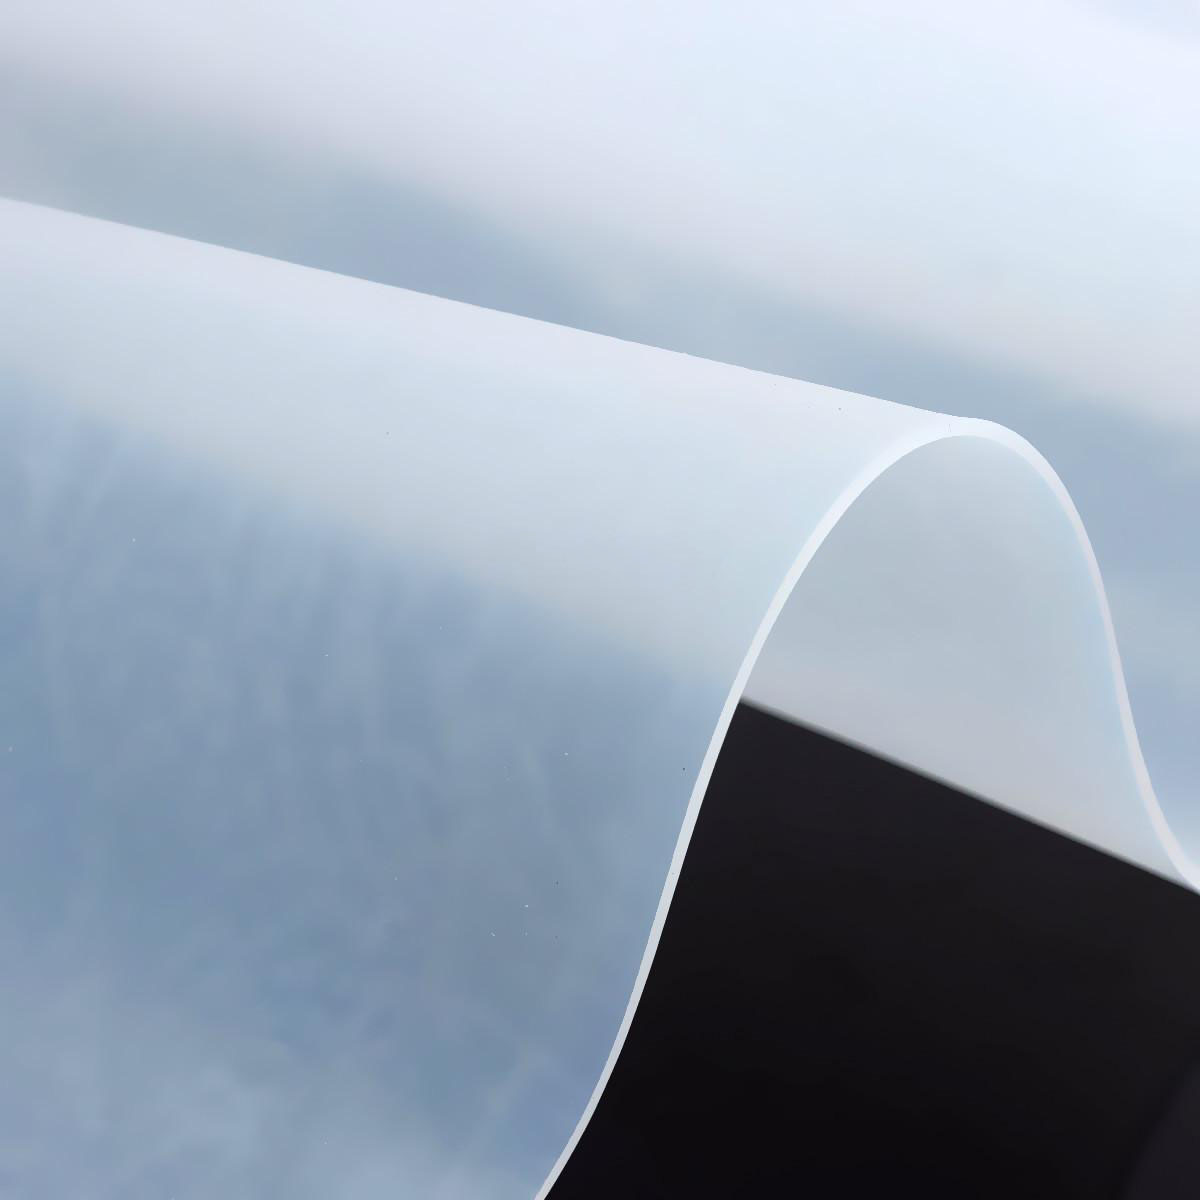 20"x20" 1mm Thickness Silicone Rubber Gasket Sheet Transparent Heat Resistant Super Clear Flexible 1pc - Paidu Suppliers